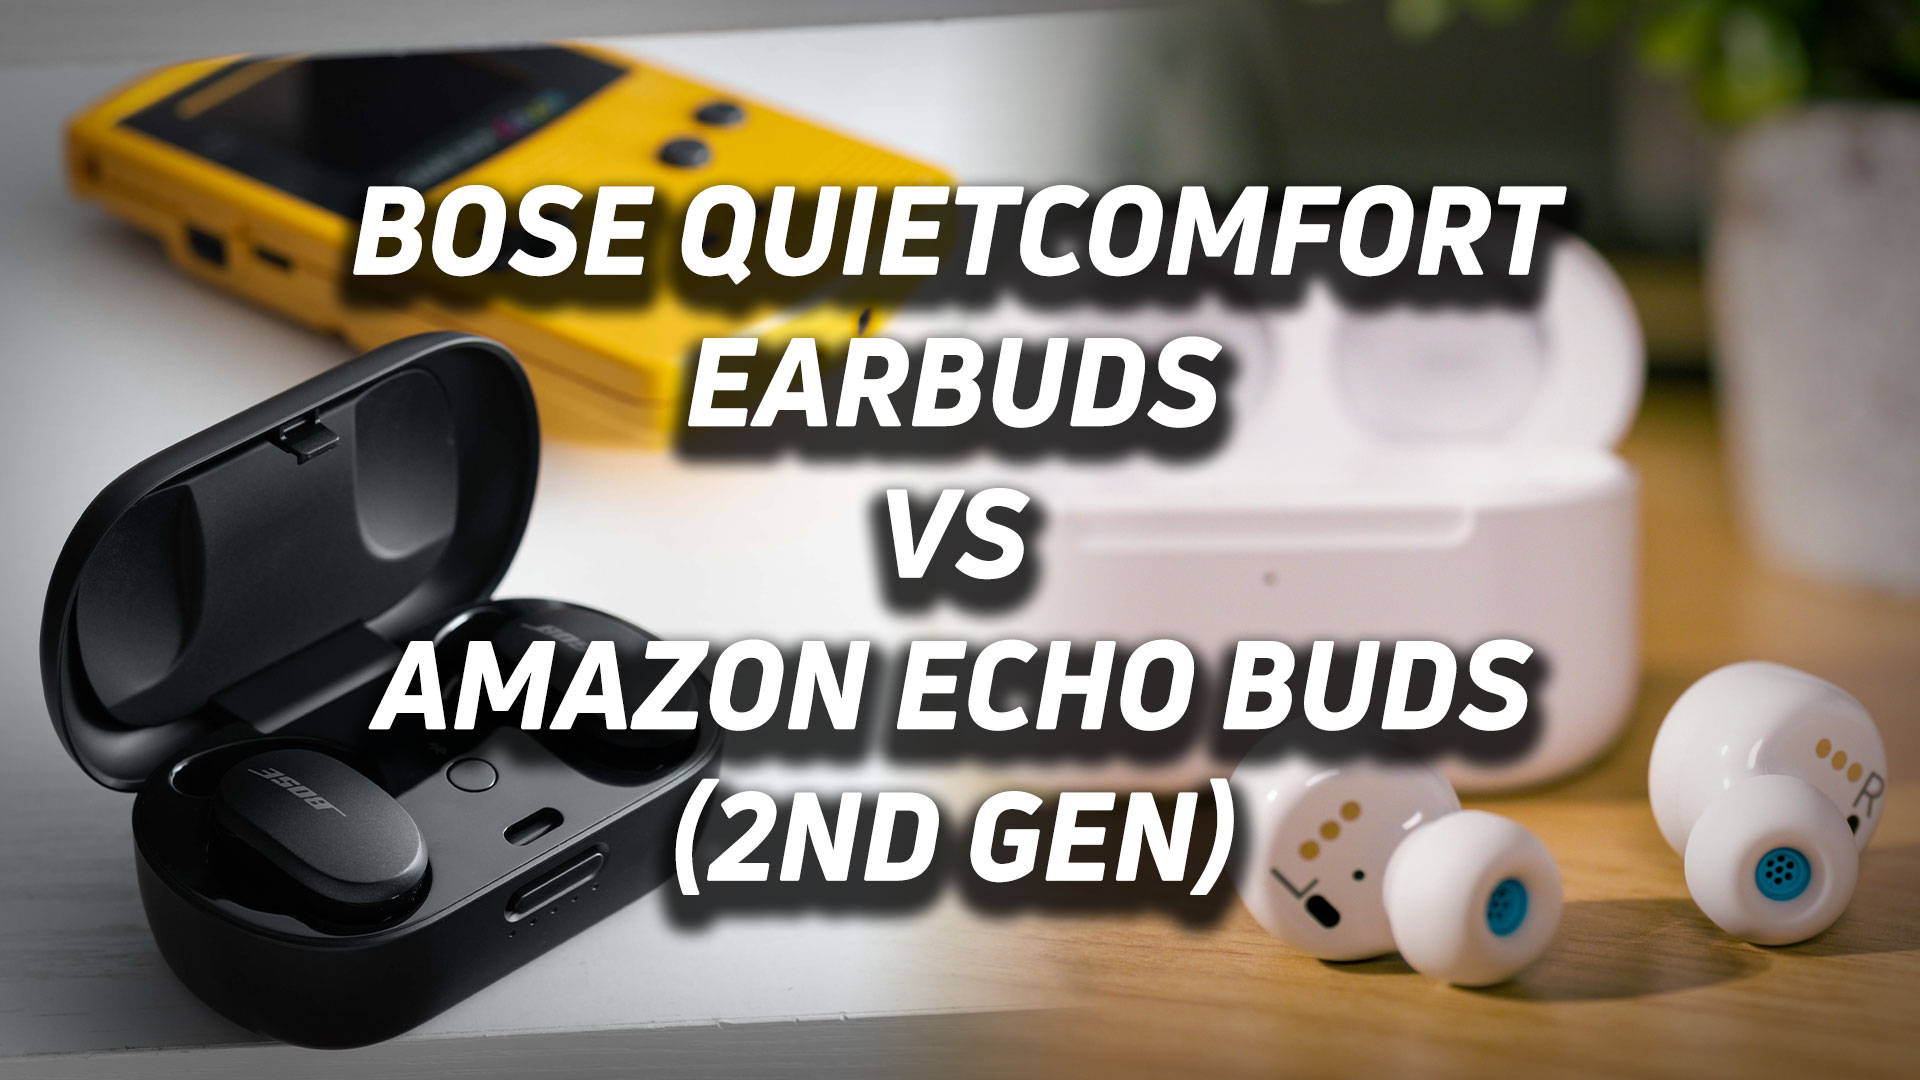 The Bose QuietComfort Earbuds and Amazon Echo Buds (2nd Gen) noise canceling true wireless earphones in a blended image with the versus text overlaid.